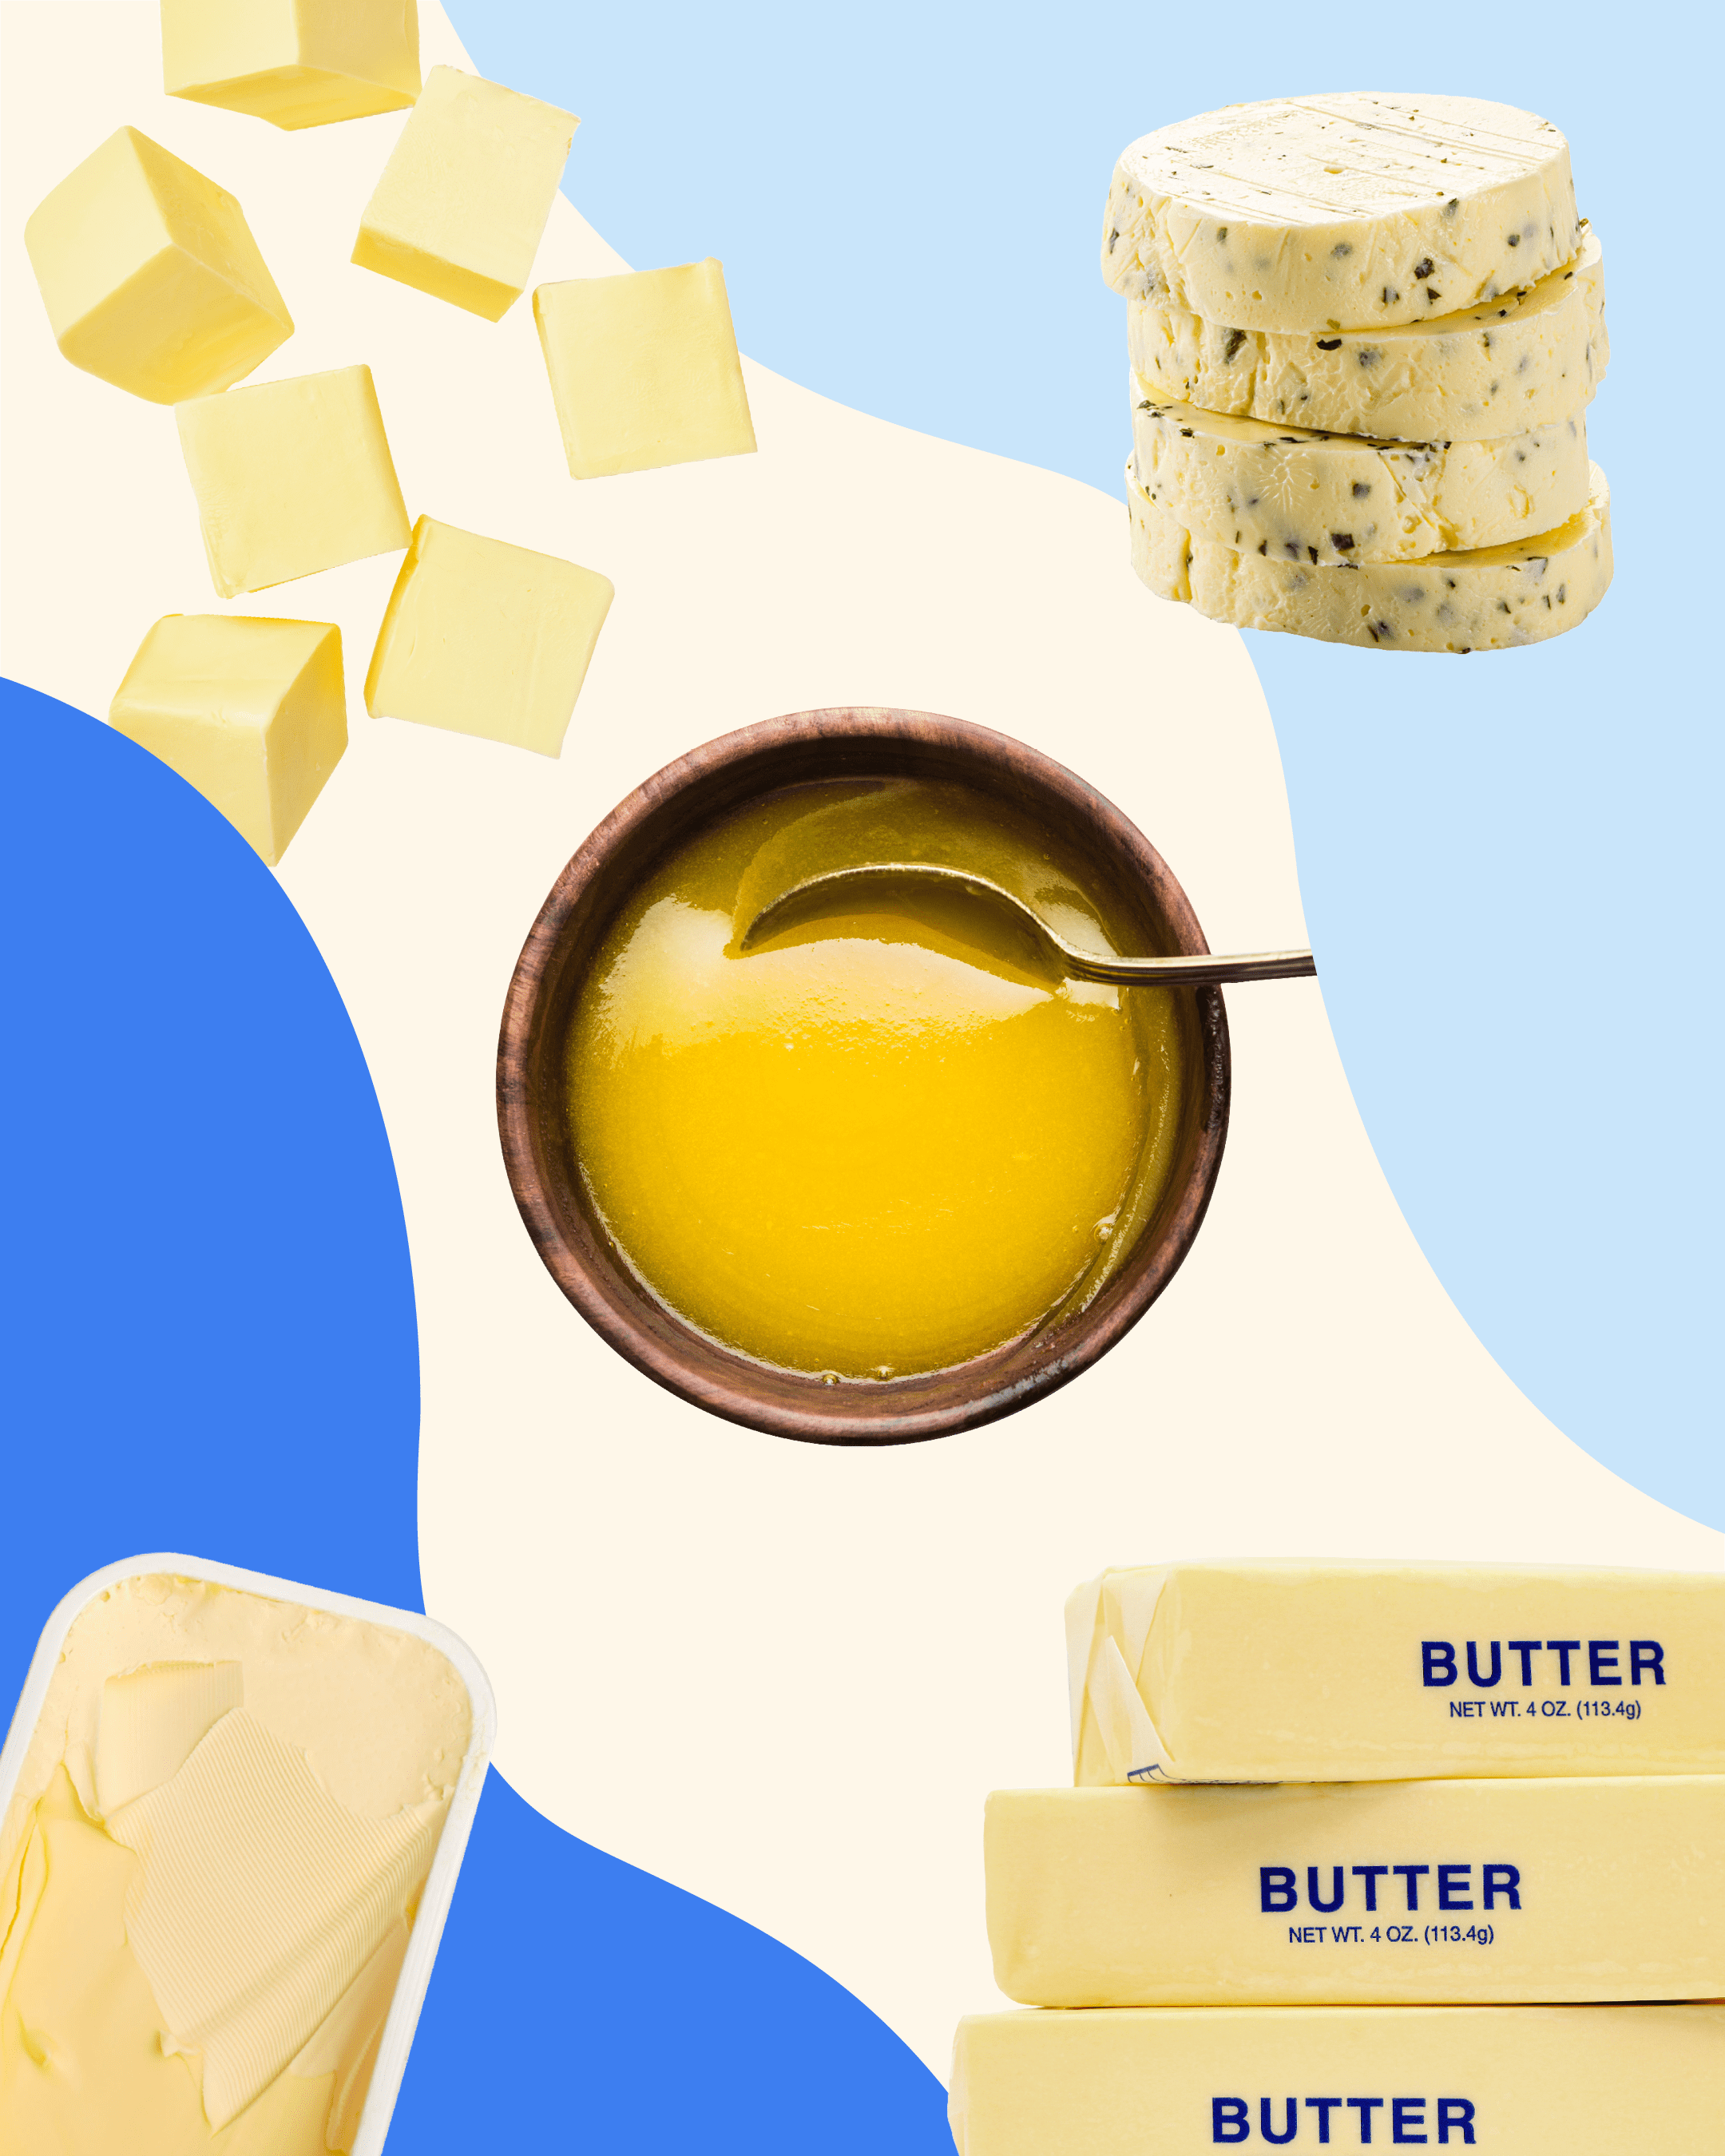 16 Different Types of Butter, Explained